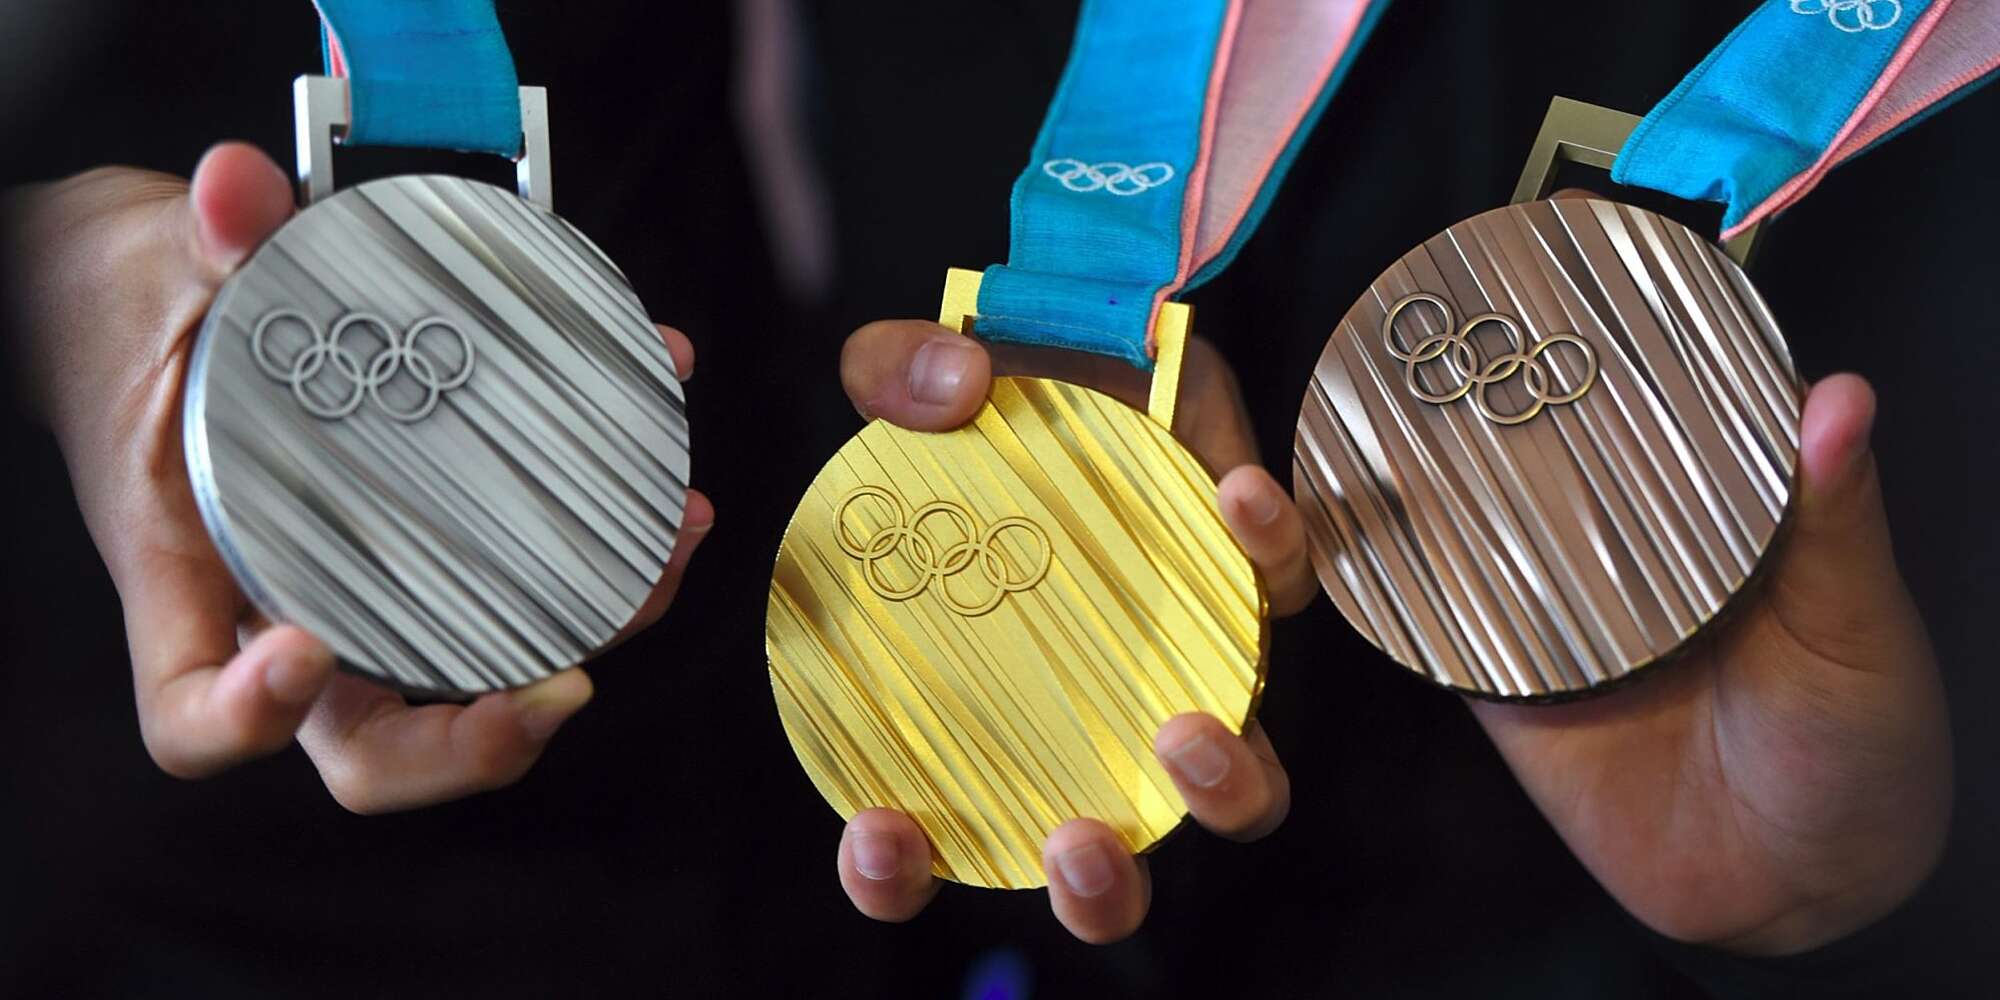 Which country has won the most Winter Olympics medals so far